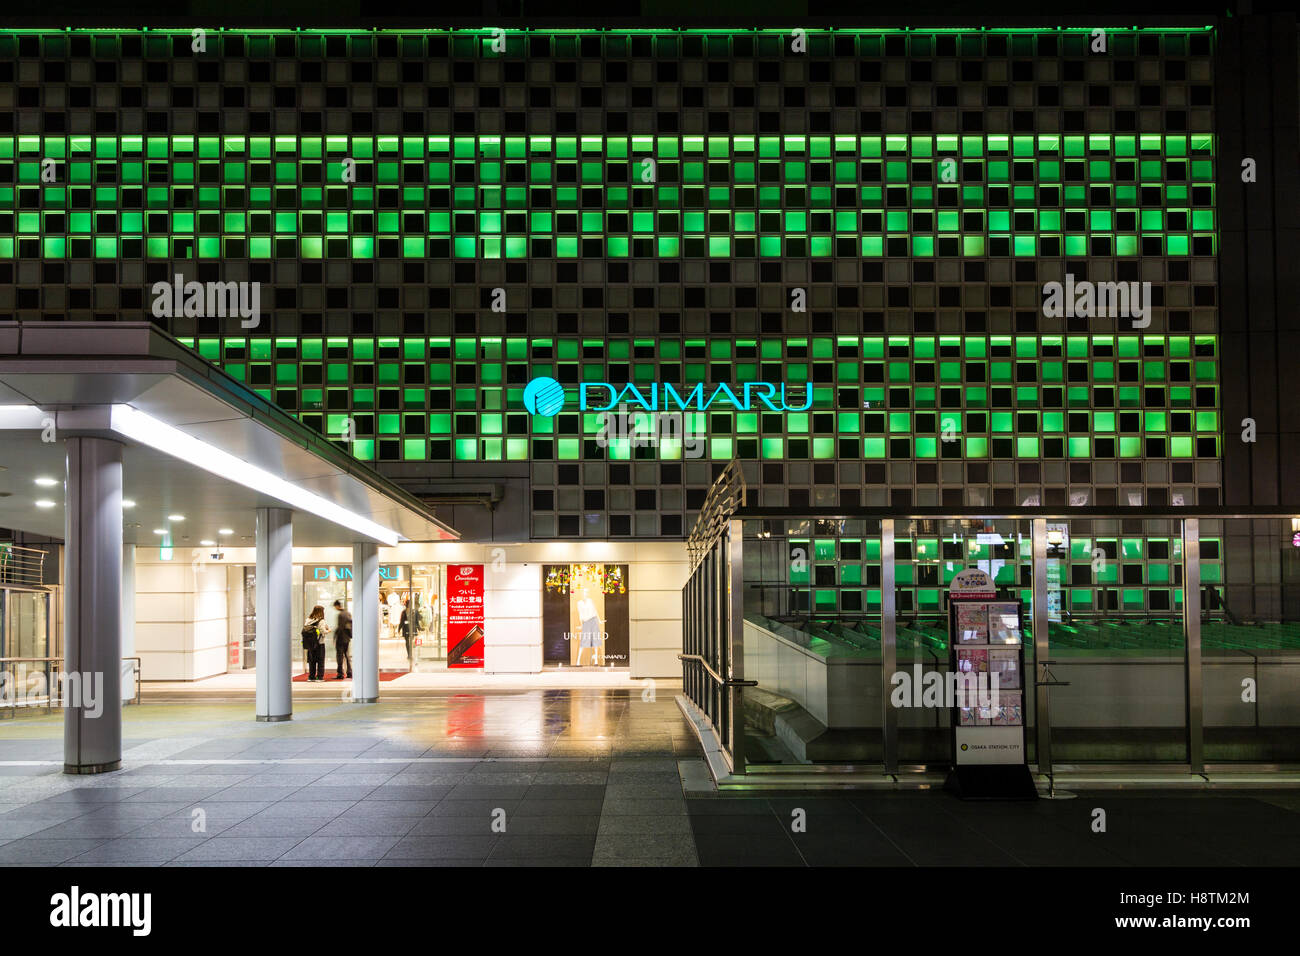 Japan, Osaka Station City. South Gate Building with entrance to Daimaru Department store and illuminated wall with store logo and name. Night time. Stock Photo